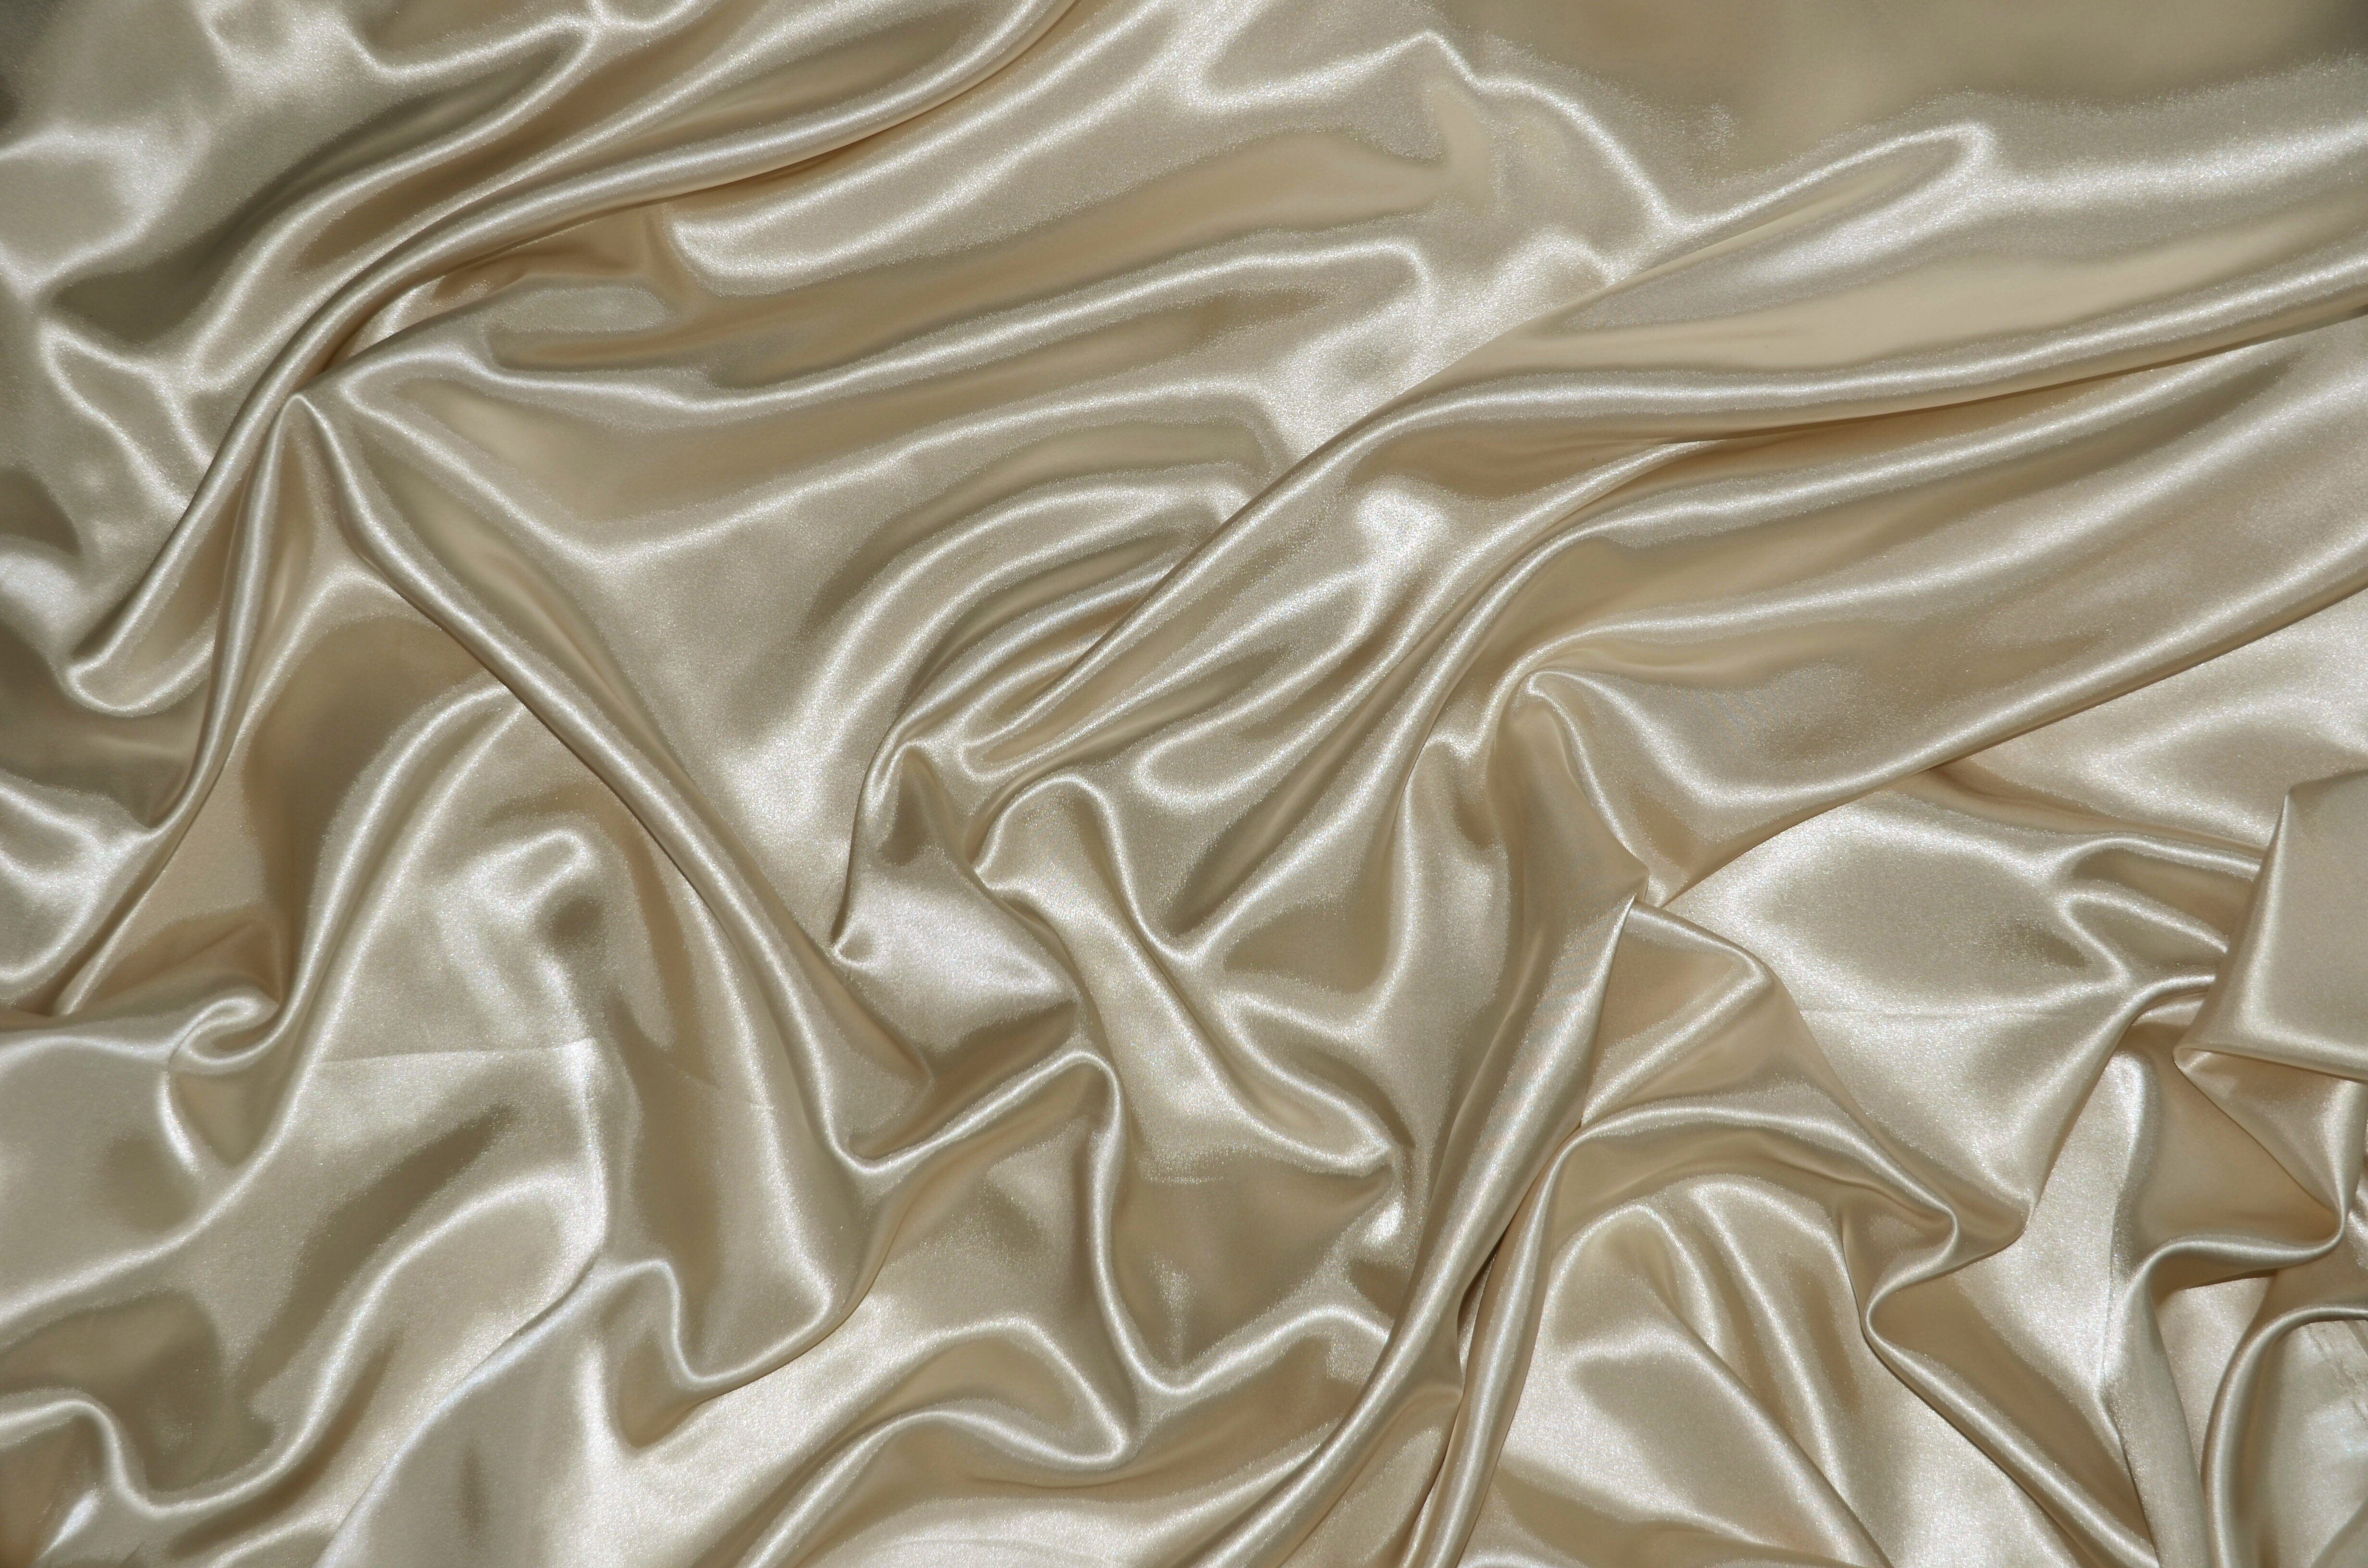 Stretch Charmeuse Satin Fabric | Soft Silky Satin Fabric | 96% Polyester 4% Spandex | Multiple Colors | Continuous Yards | Fabric mytextilefabric Champagne 